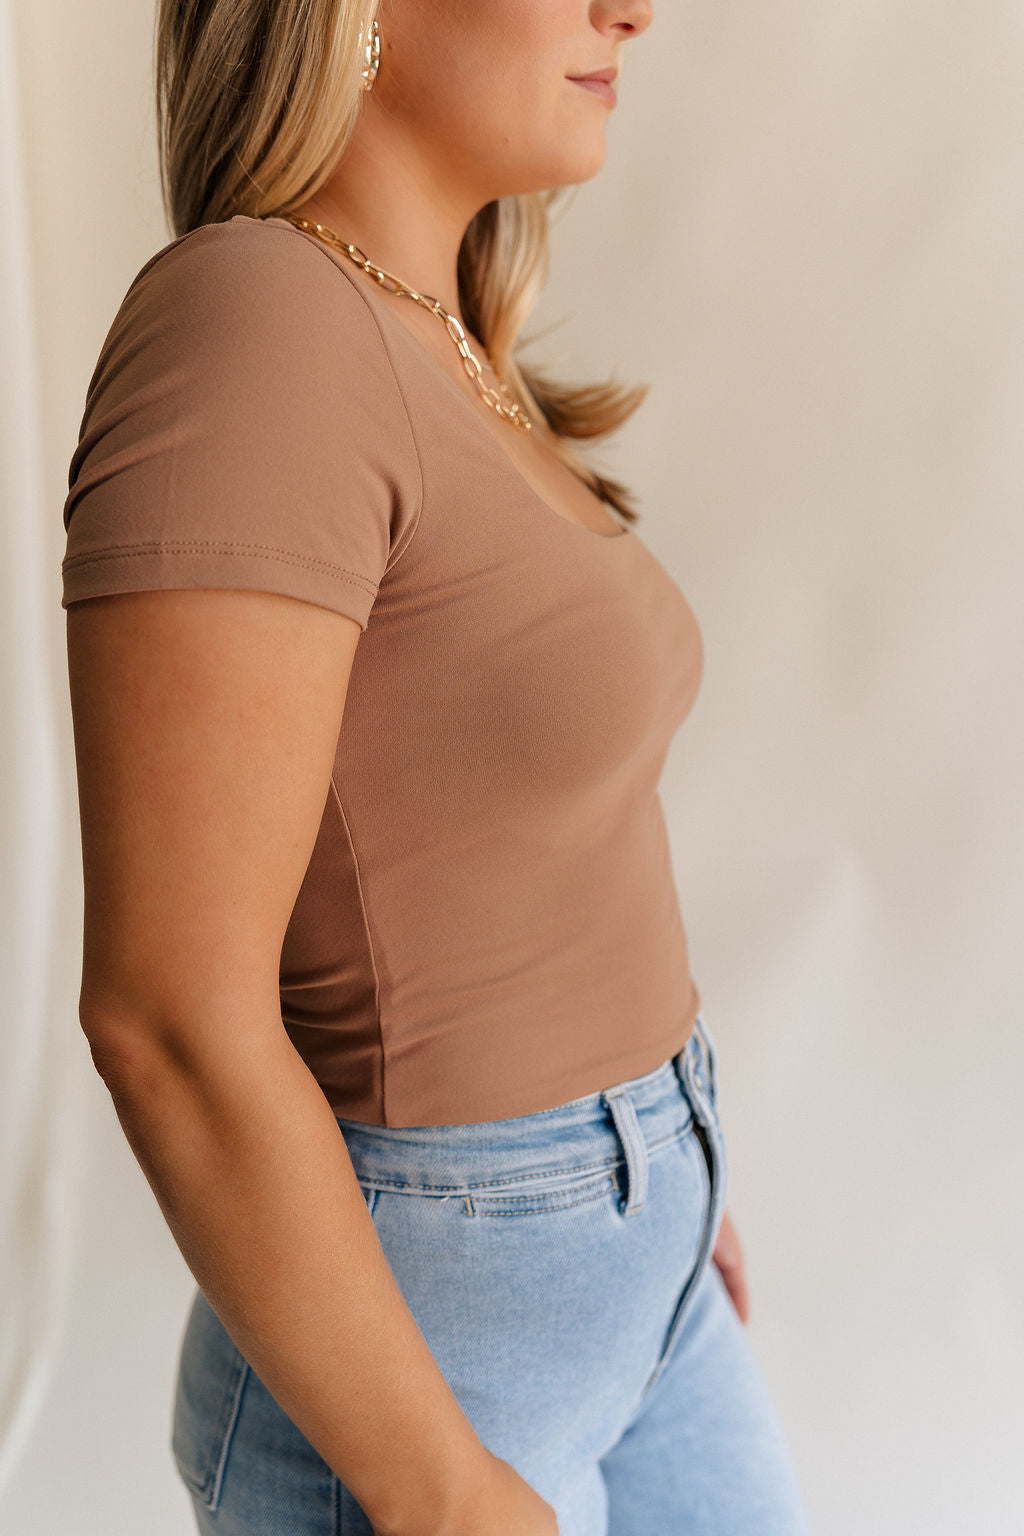 Close up side view of female model weariing the Saylor Toffee Brown Short Sleeve Top which features Light Brown Lightweight Fabric, Square Neckline and Short Sleeves